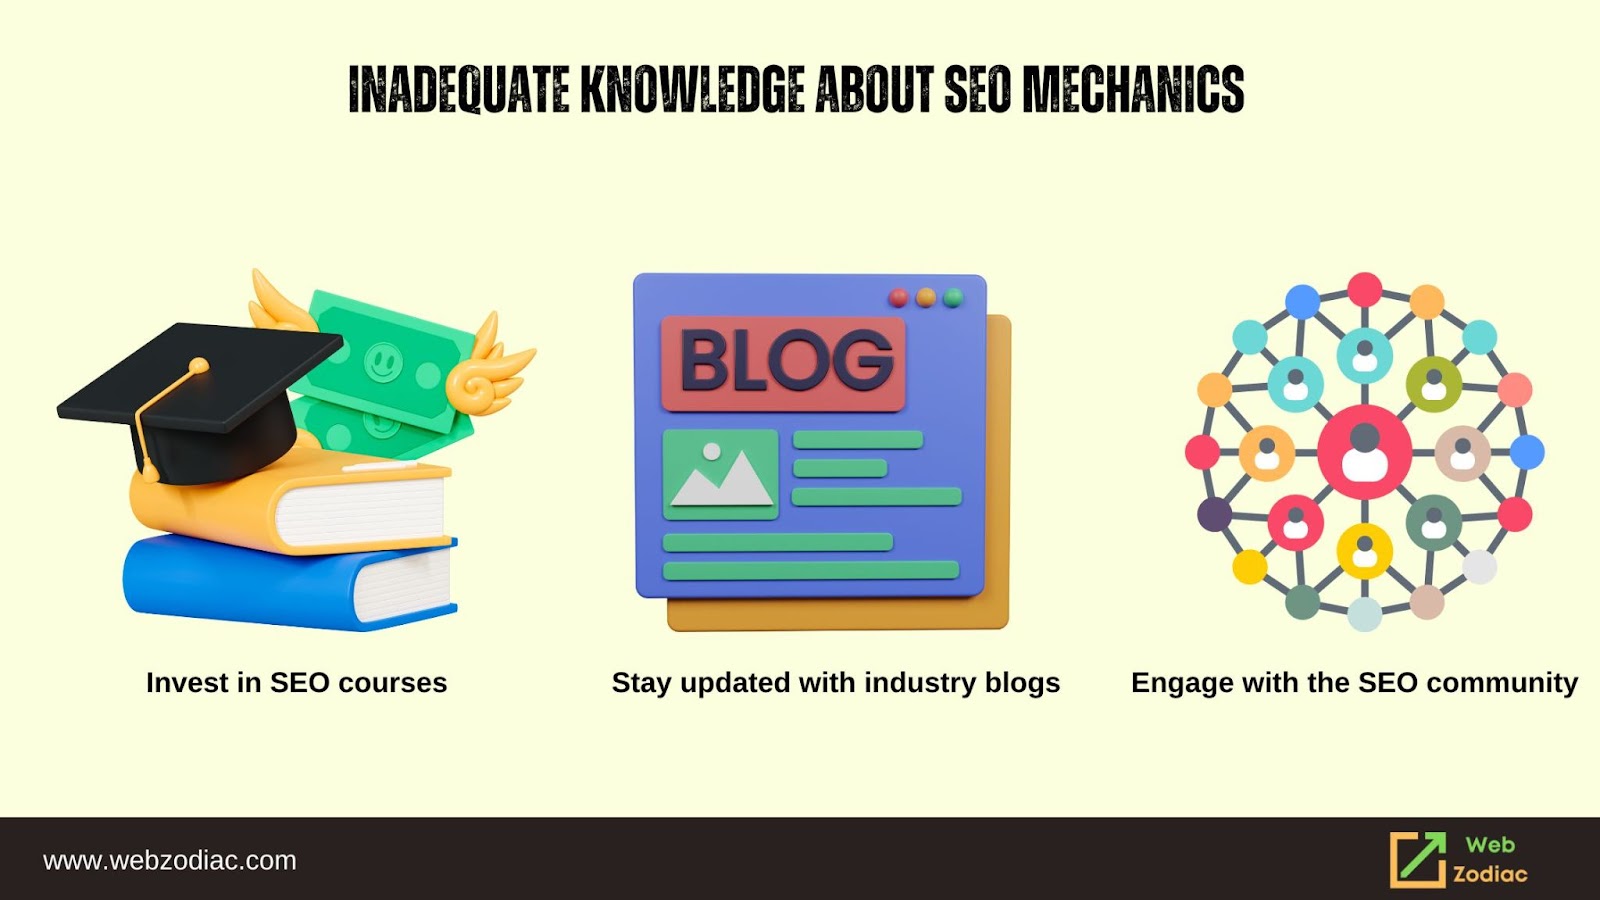 Inadequate Knowledge About SEO Mechanics Image